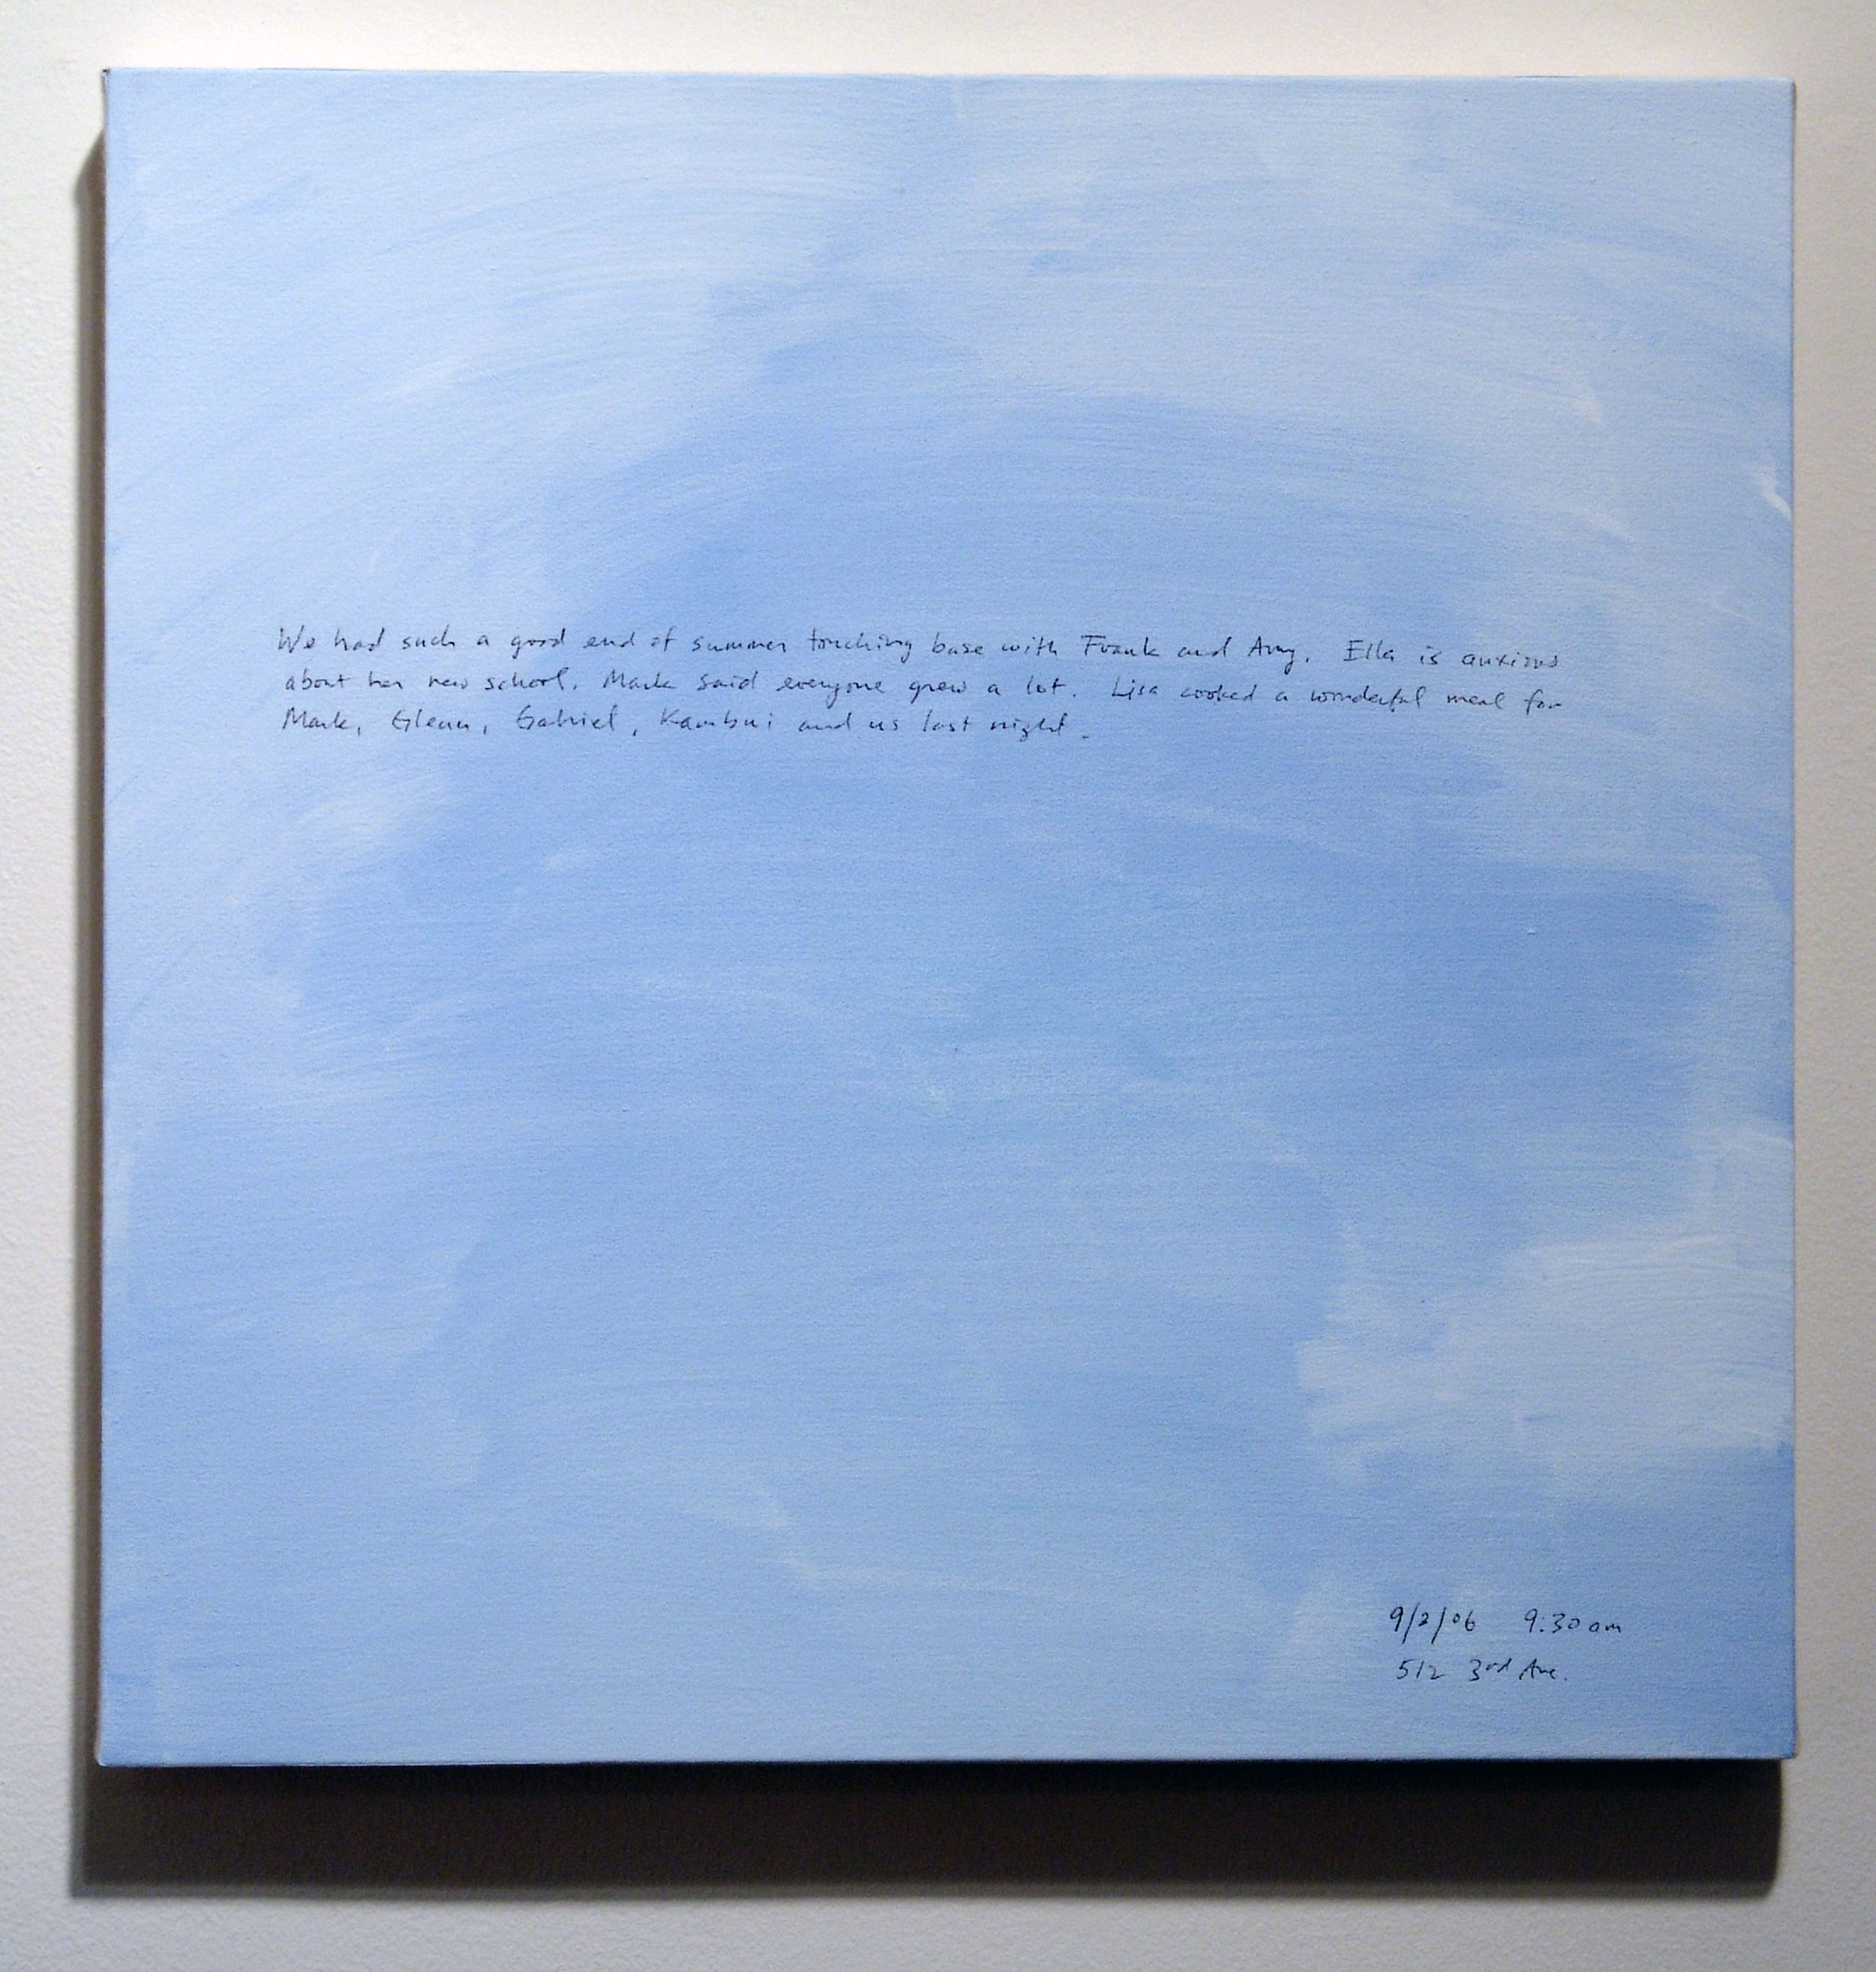 A 14 × 14 inch, acrylic painting of the sky. A journal entry is handwritten on the painting:

“We had such a good end of summer touching base with Frank and Amy. Ella is anxious about her new school. Mark said everyone grew a lot. Lisa cooked a wonderful meal for Mark, Glenn, Gabriel, Kambui and us last night.

9/2/06 9:30 am
512 3rd Ave.”